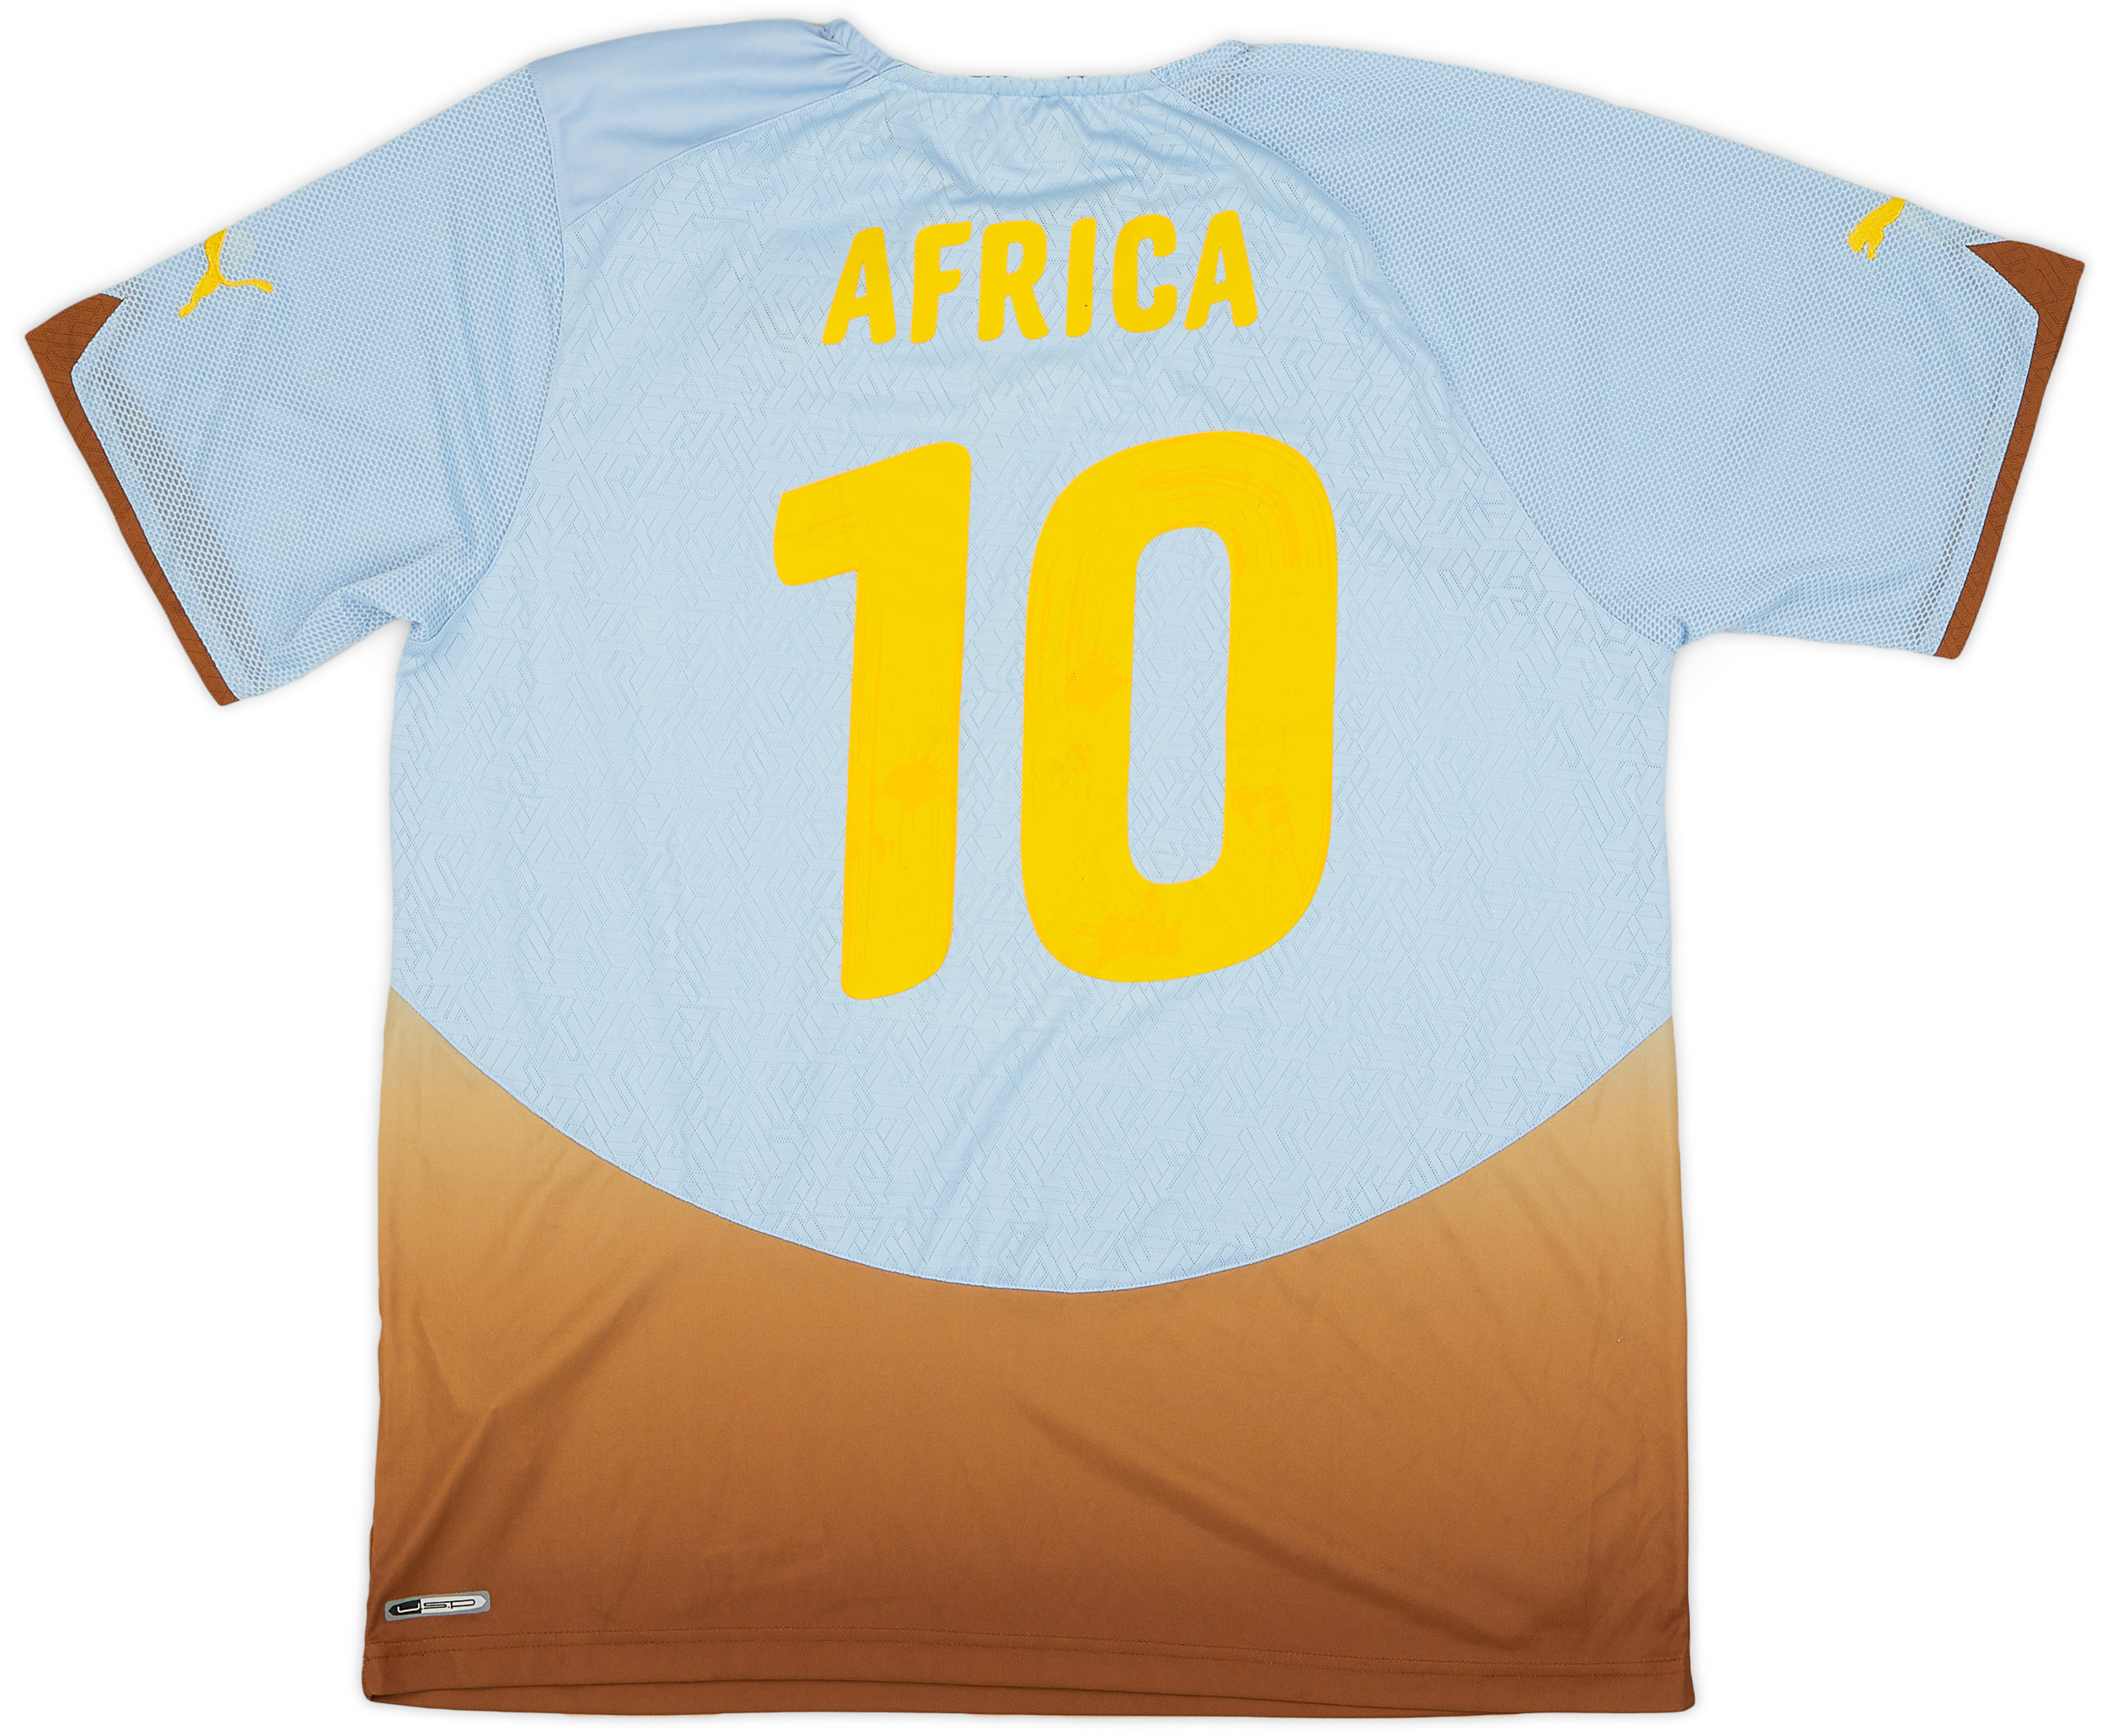 2010-11 Africa Unity Special Edition Third Shirt - 8/10 - ()